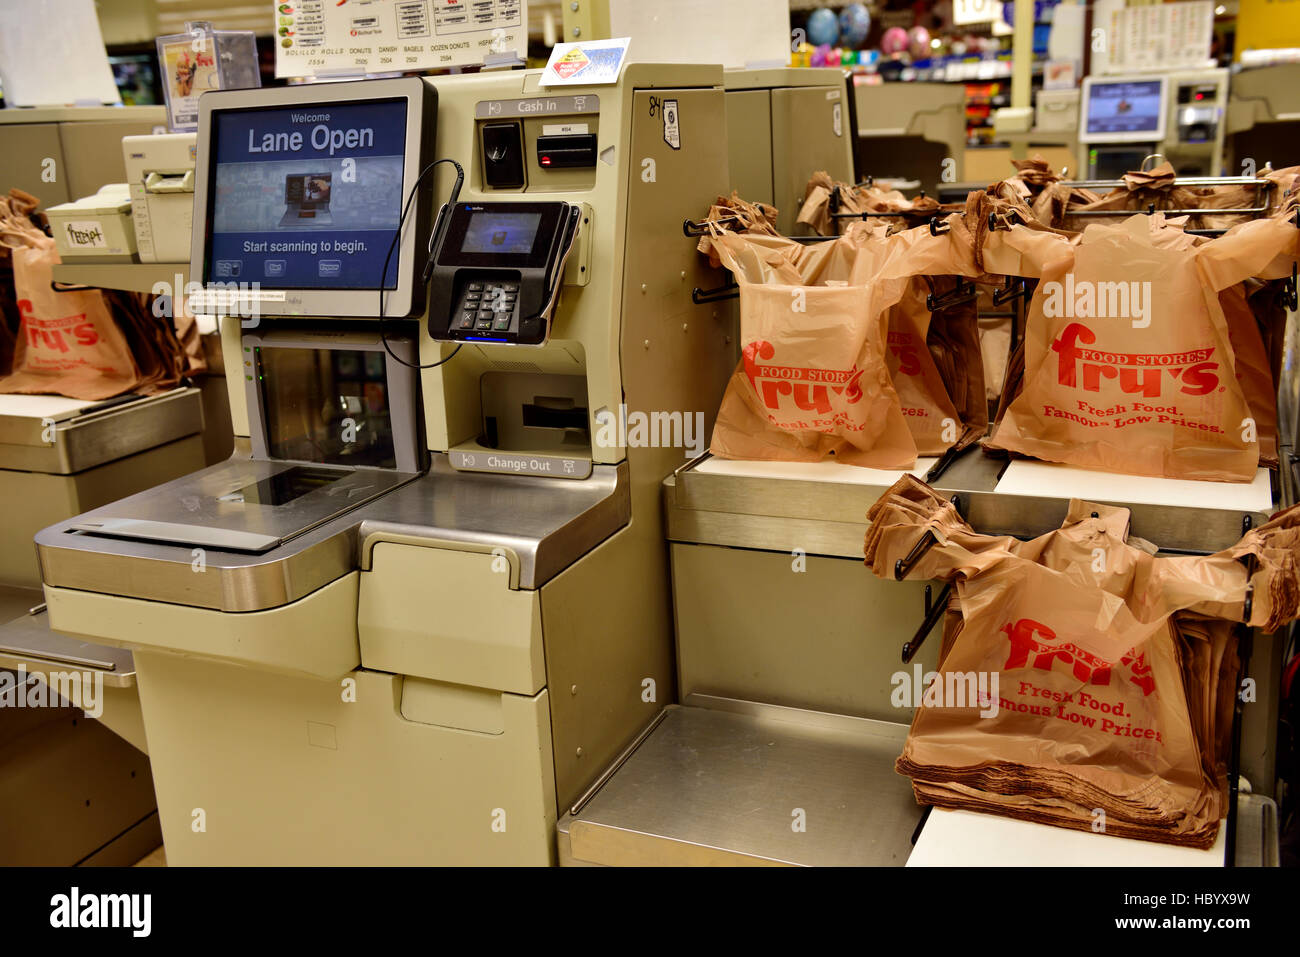 Self service check out till with plastic carrier bags in Fry's food stores Arizona, USA. Stock Photo